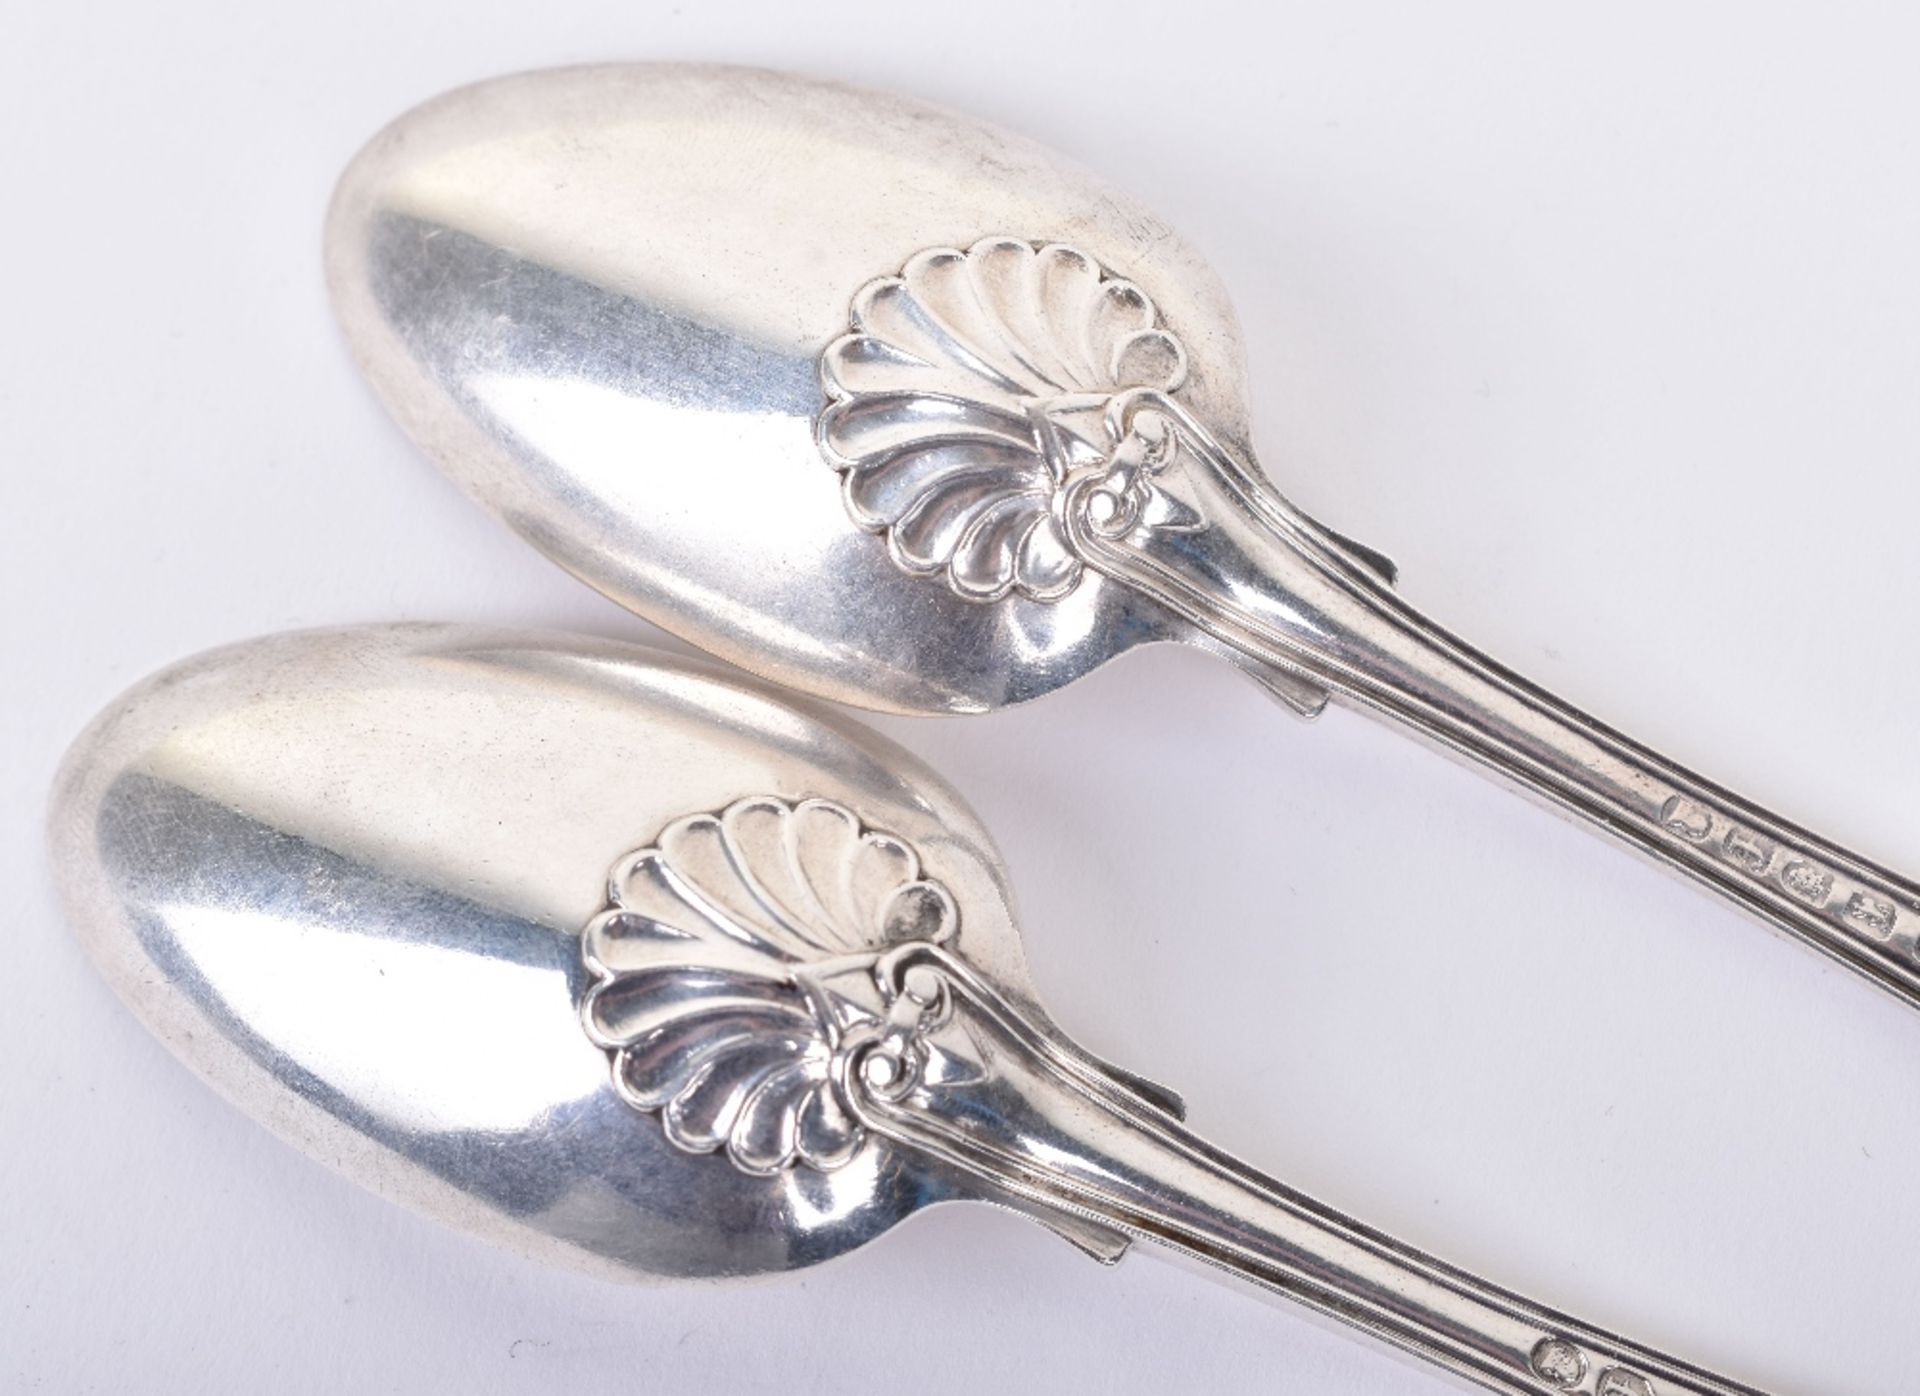 A pair of George IV fiddle and shell pattern silver spoons, by Paul Storr, London, 1821 - Image 5 of 7